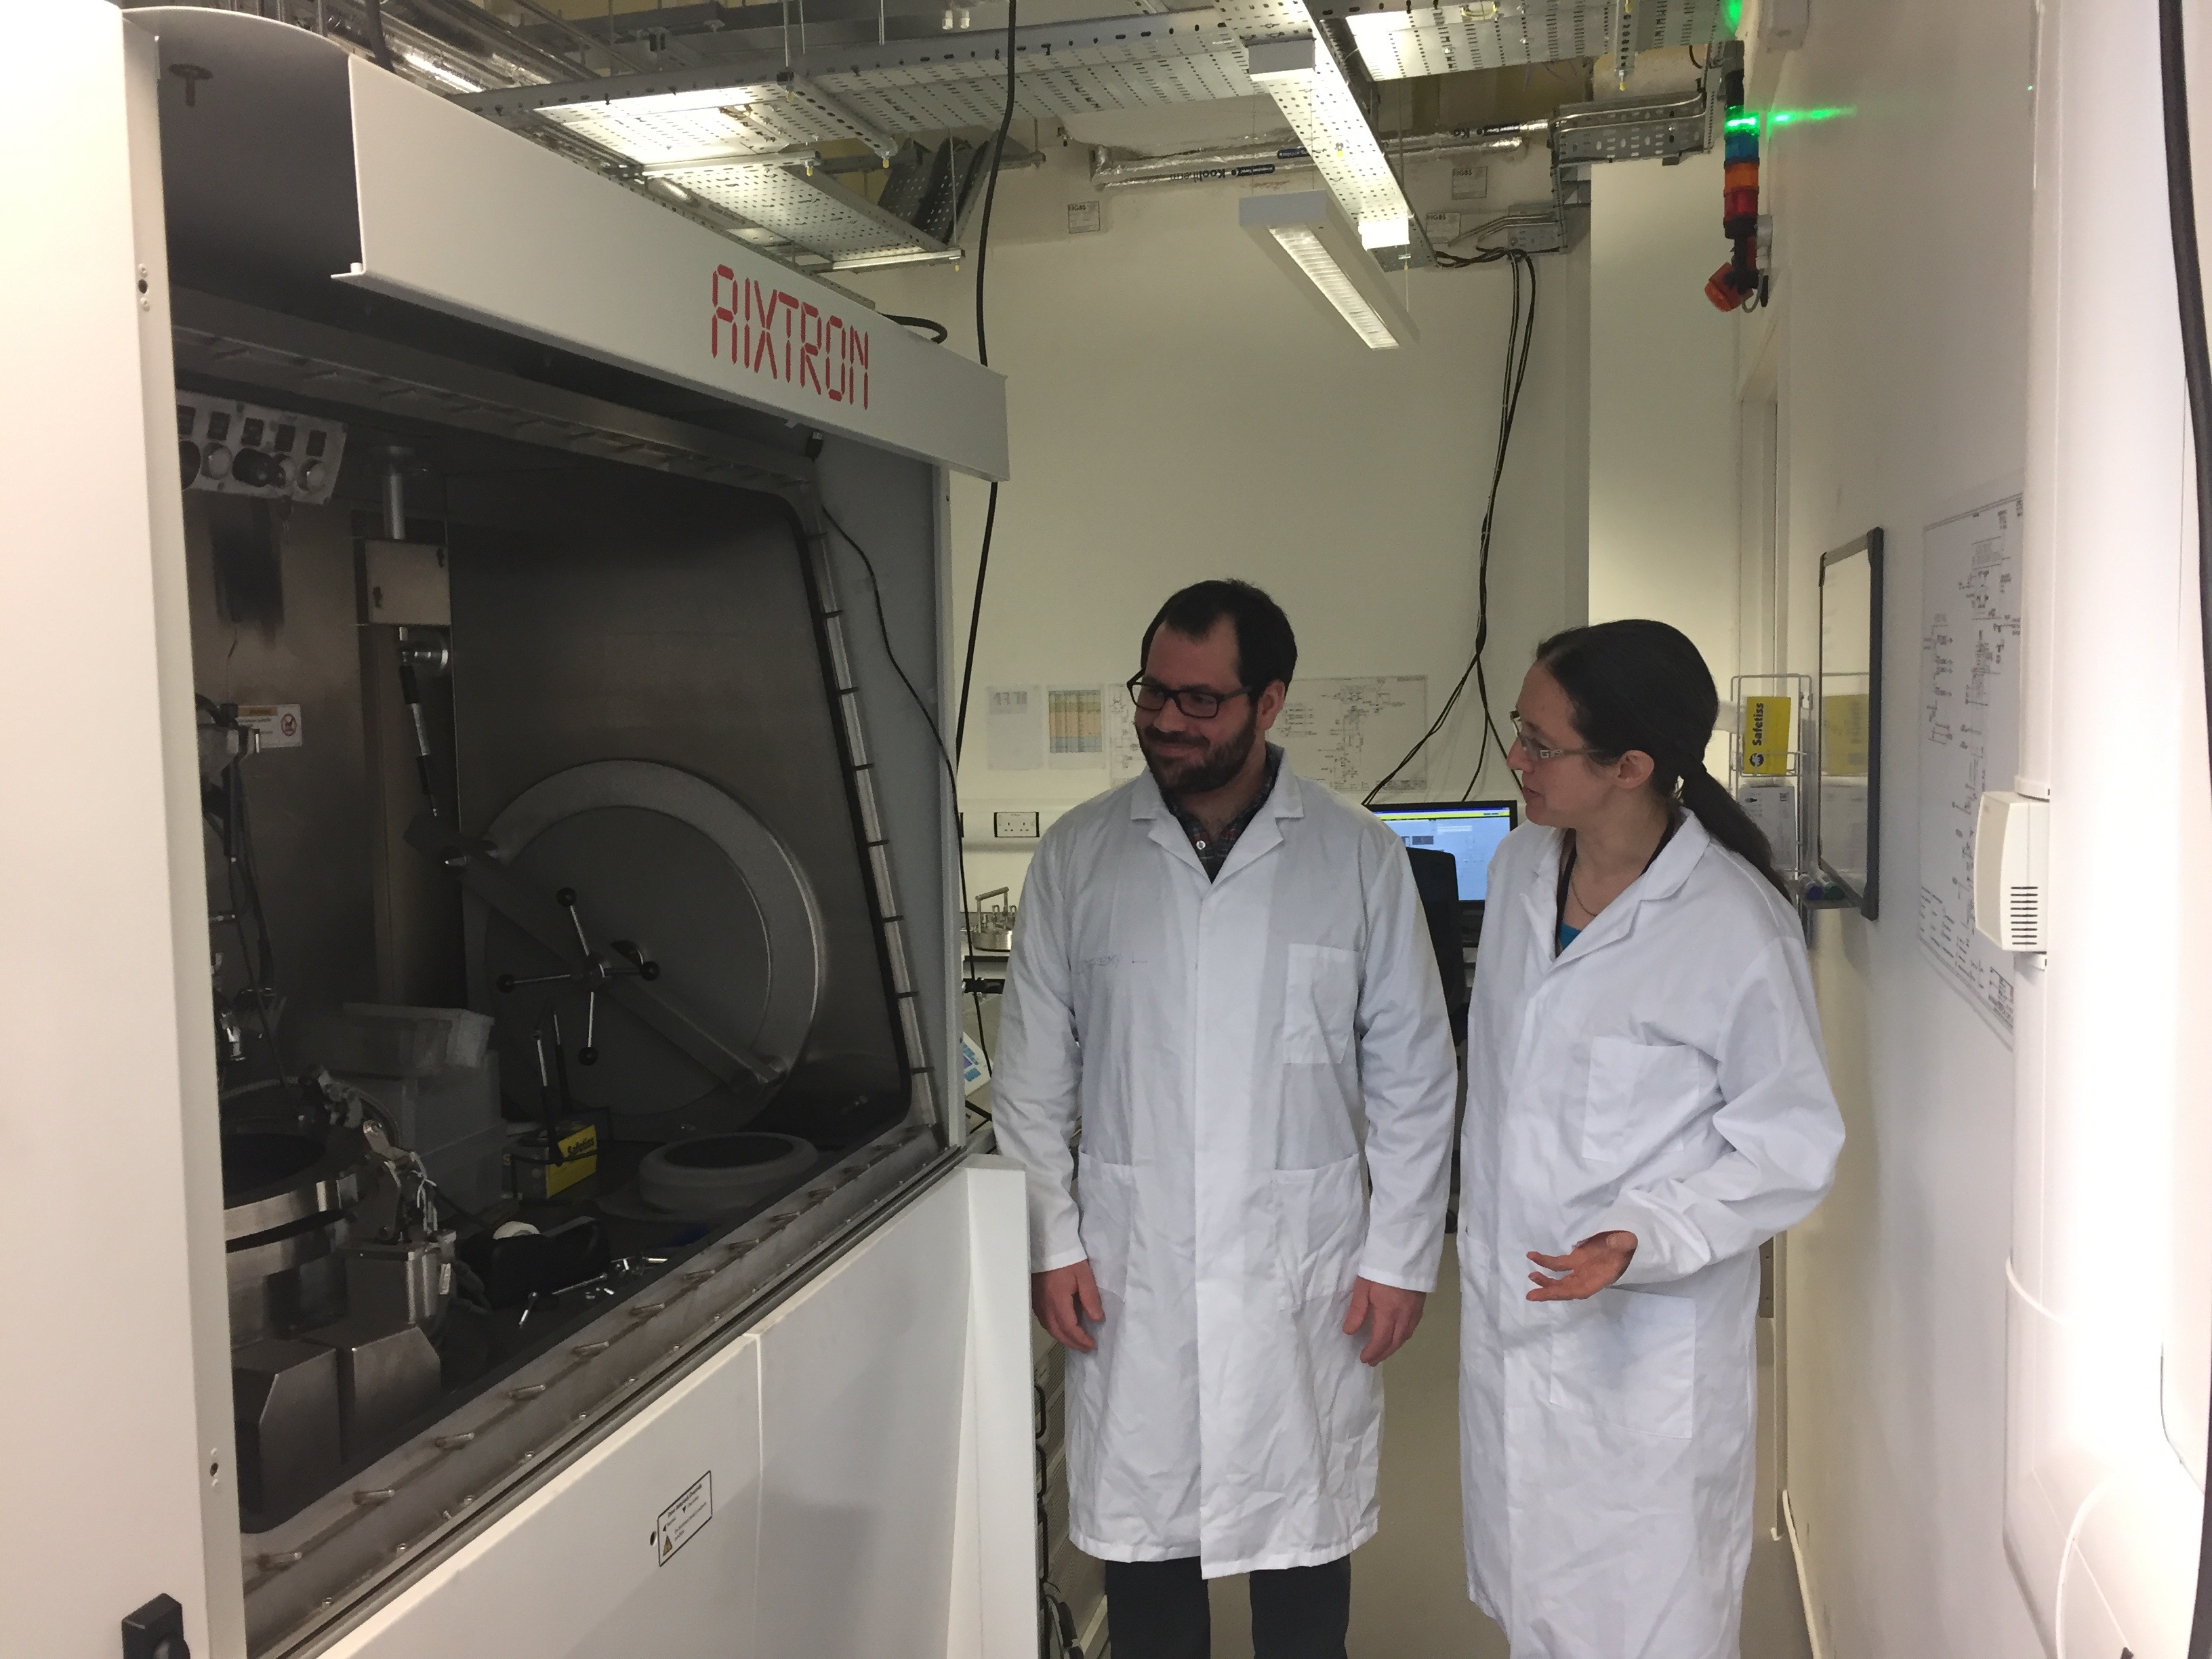 Rachel and Tom with a crystal growth system